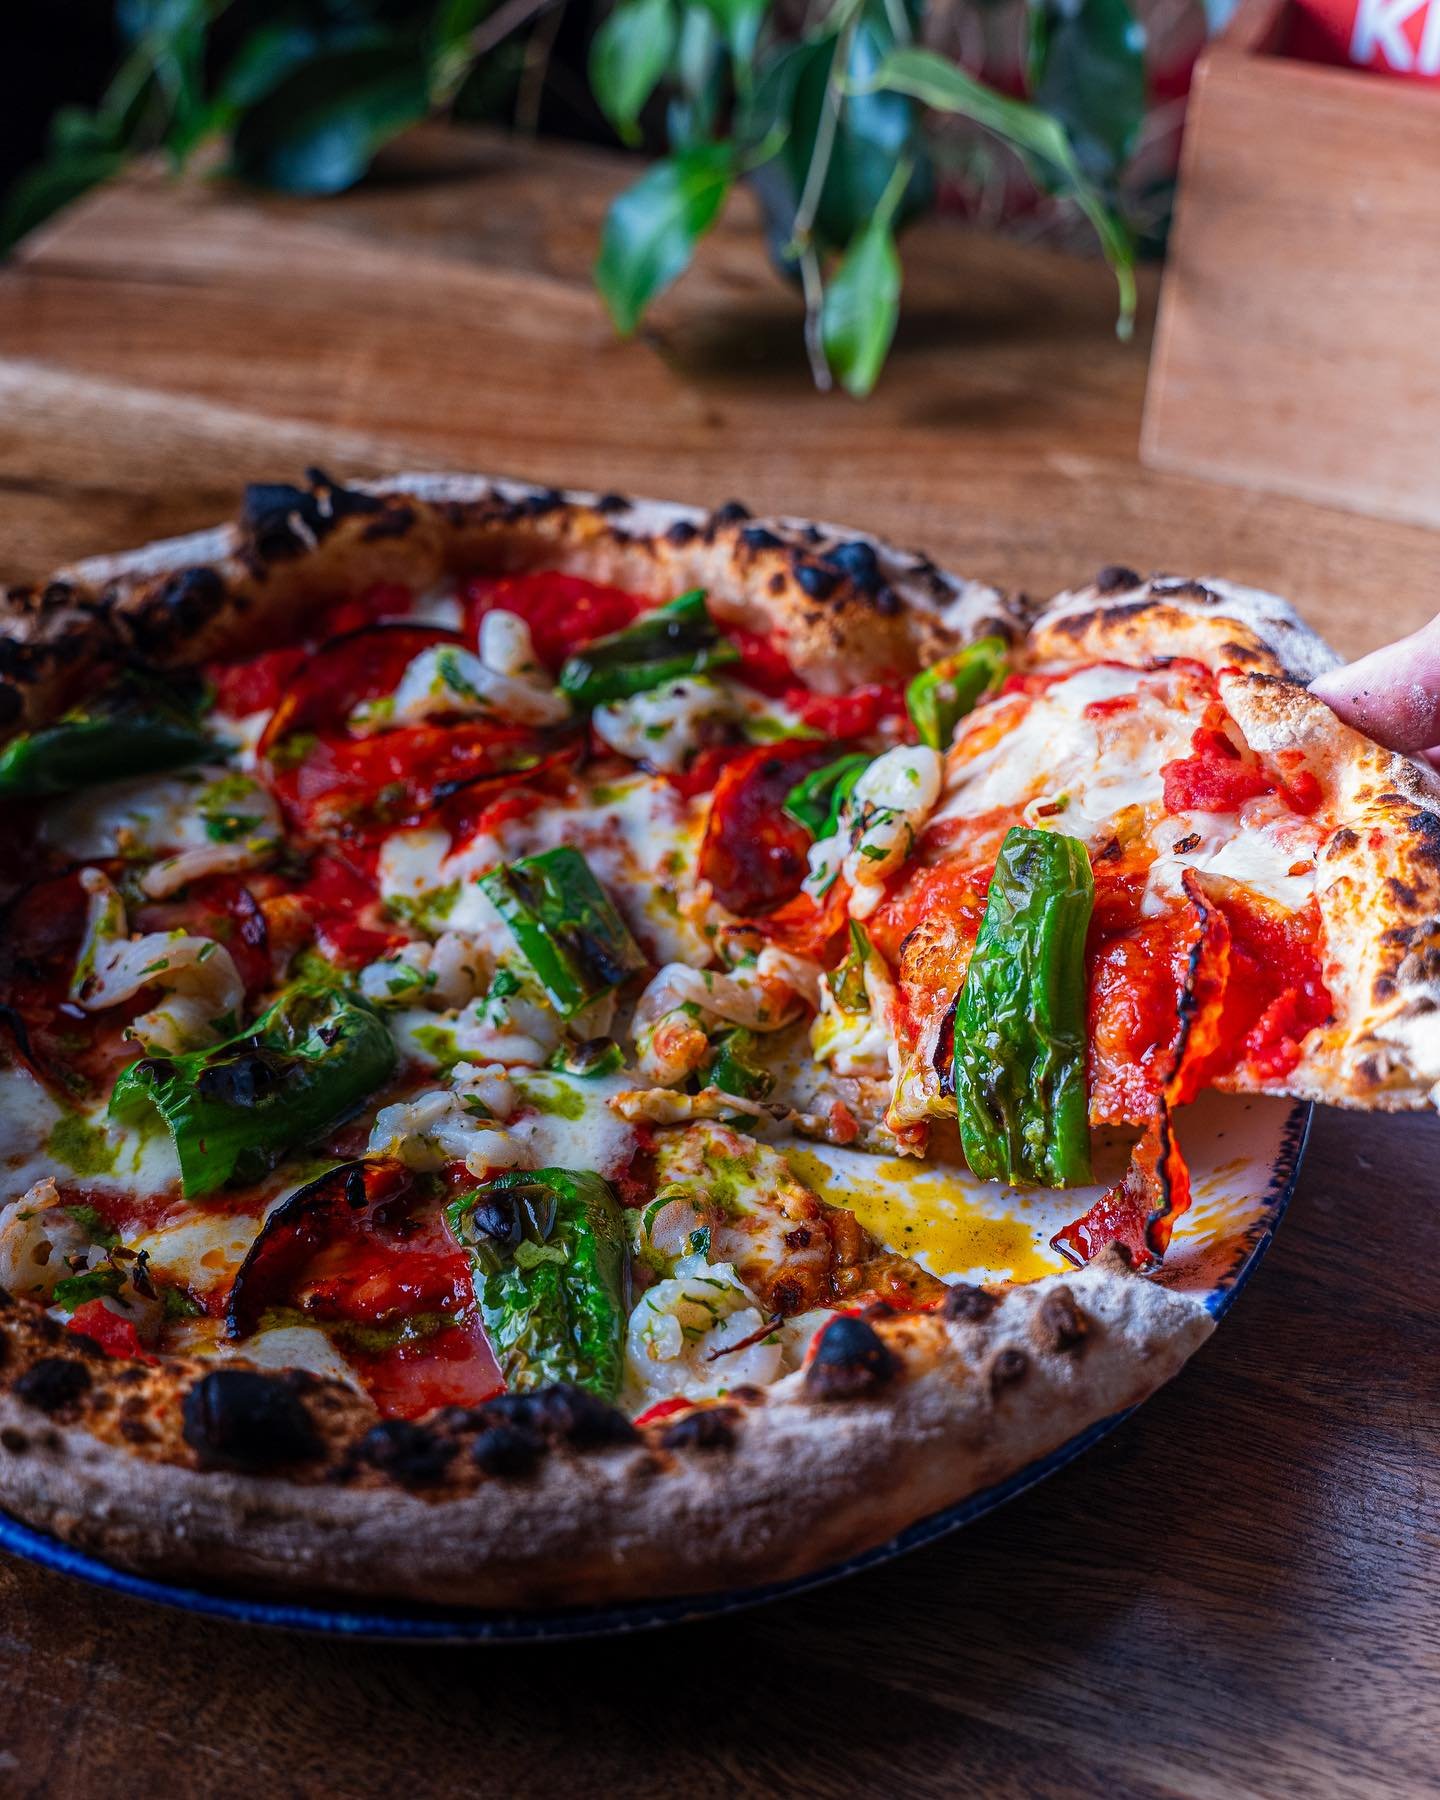 2 new specials from the team at @erics__pizza 🍕

🍝 Wood fired asparagus gnocci 

🦐 Prawn Pizza: gremolata prawns, padr&oacute;n peppers, chorizo, chilli flakes, wild garlic oil

Come and check out our amazing vendors:

☕️ @folkscoffeeco
🥞 @christ